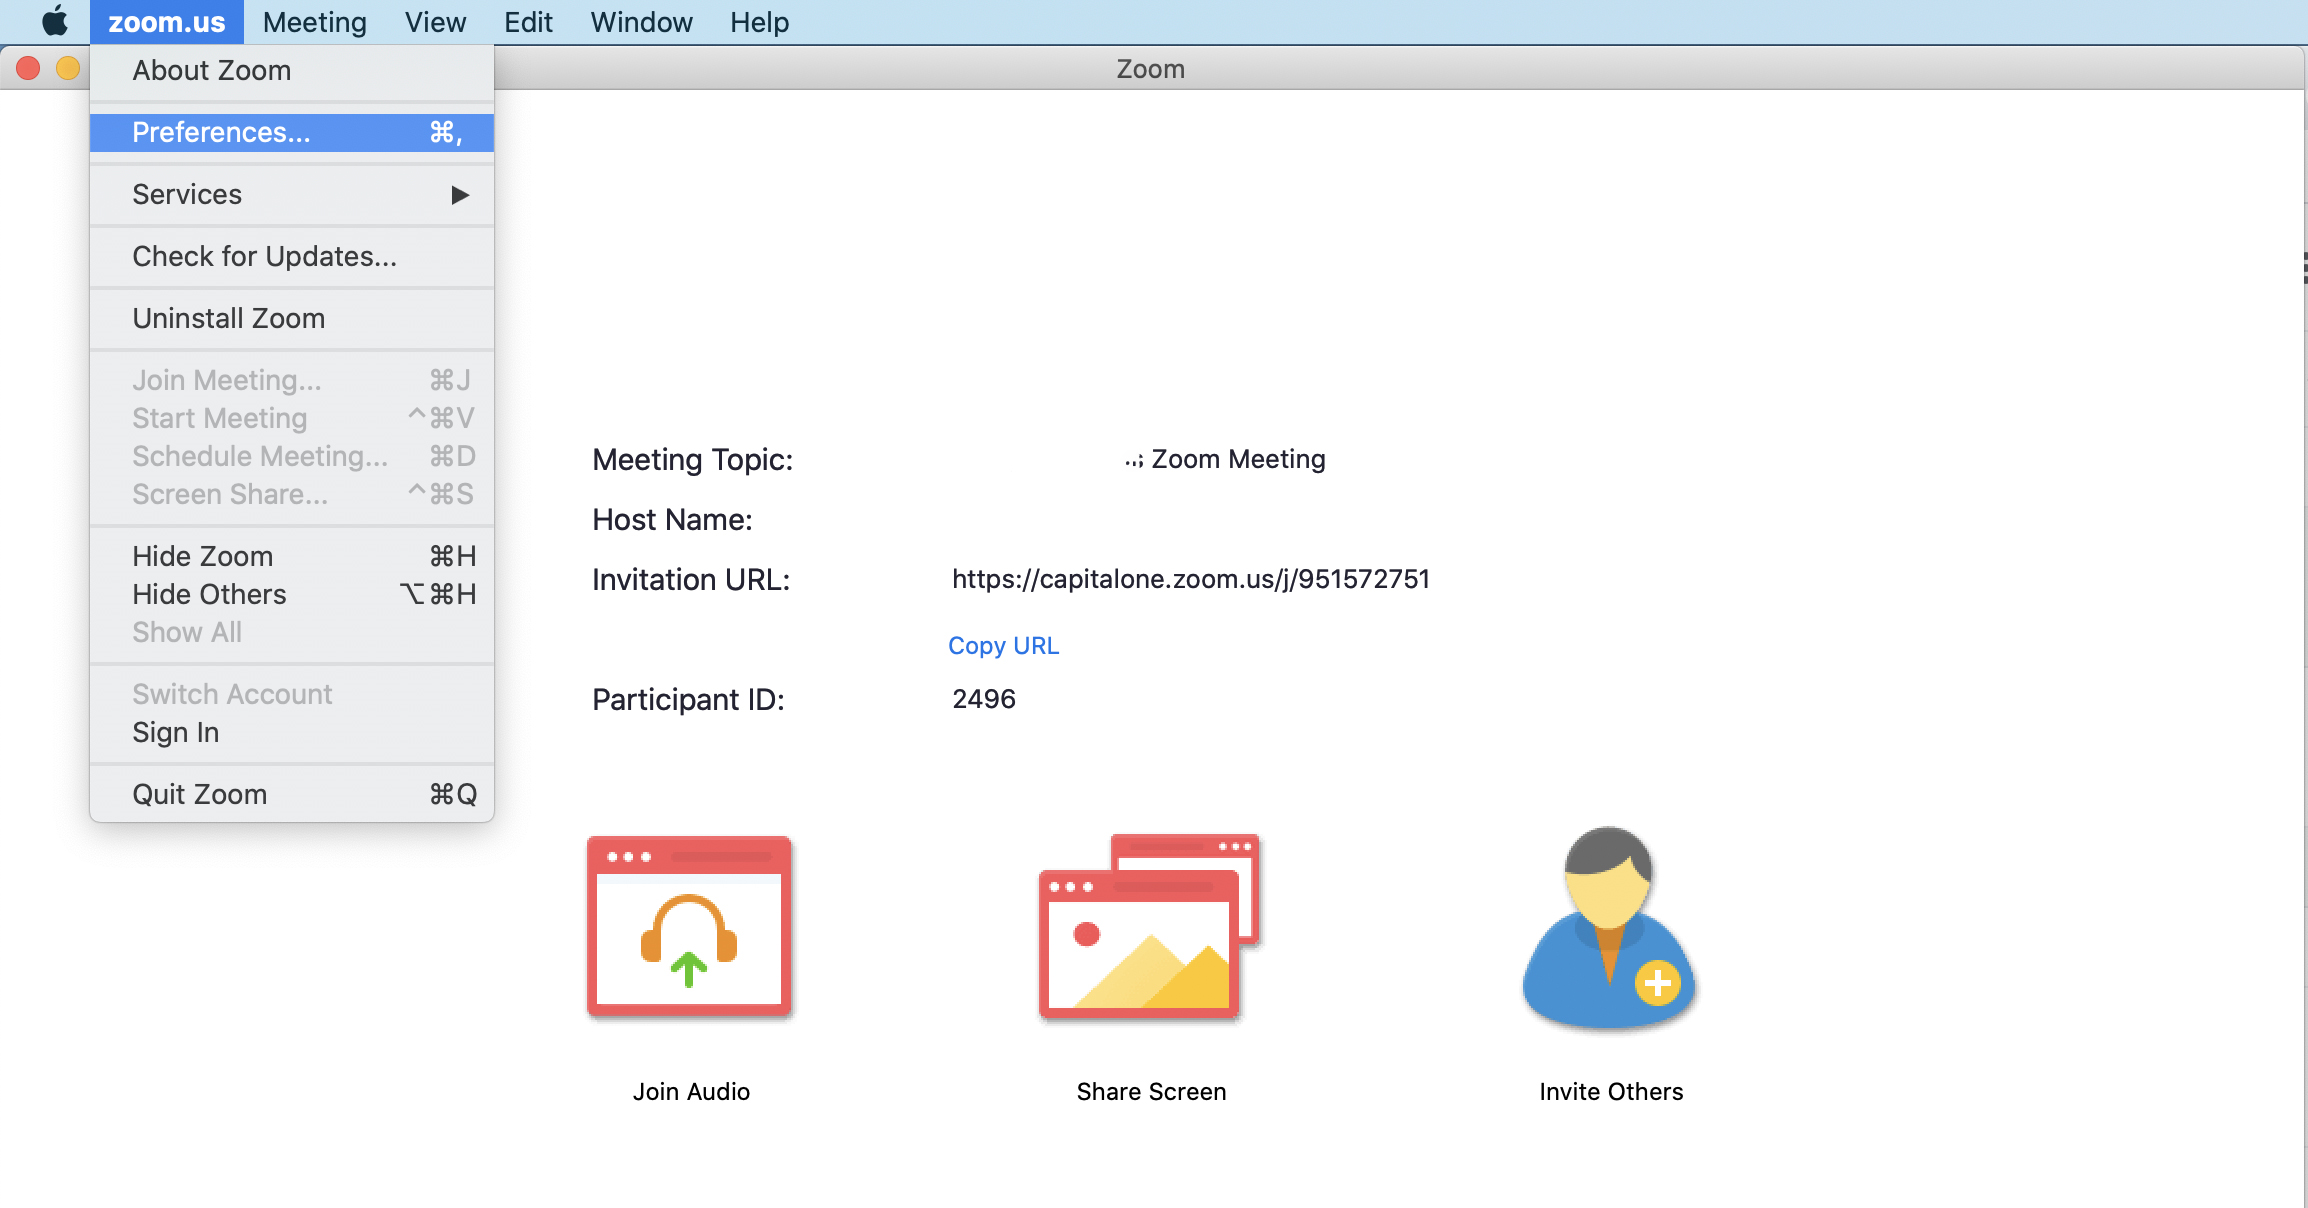 Capital One gives tips on using zoom backgrounds for virtual meetings and interviews